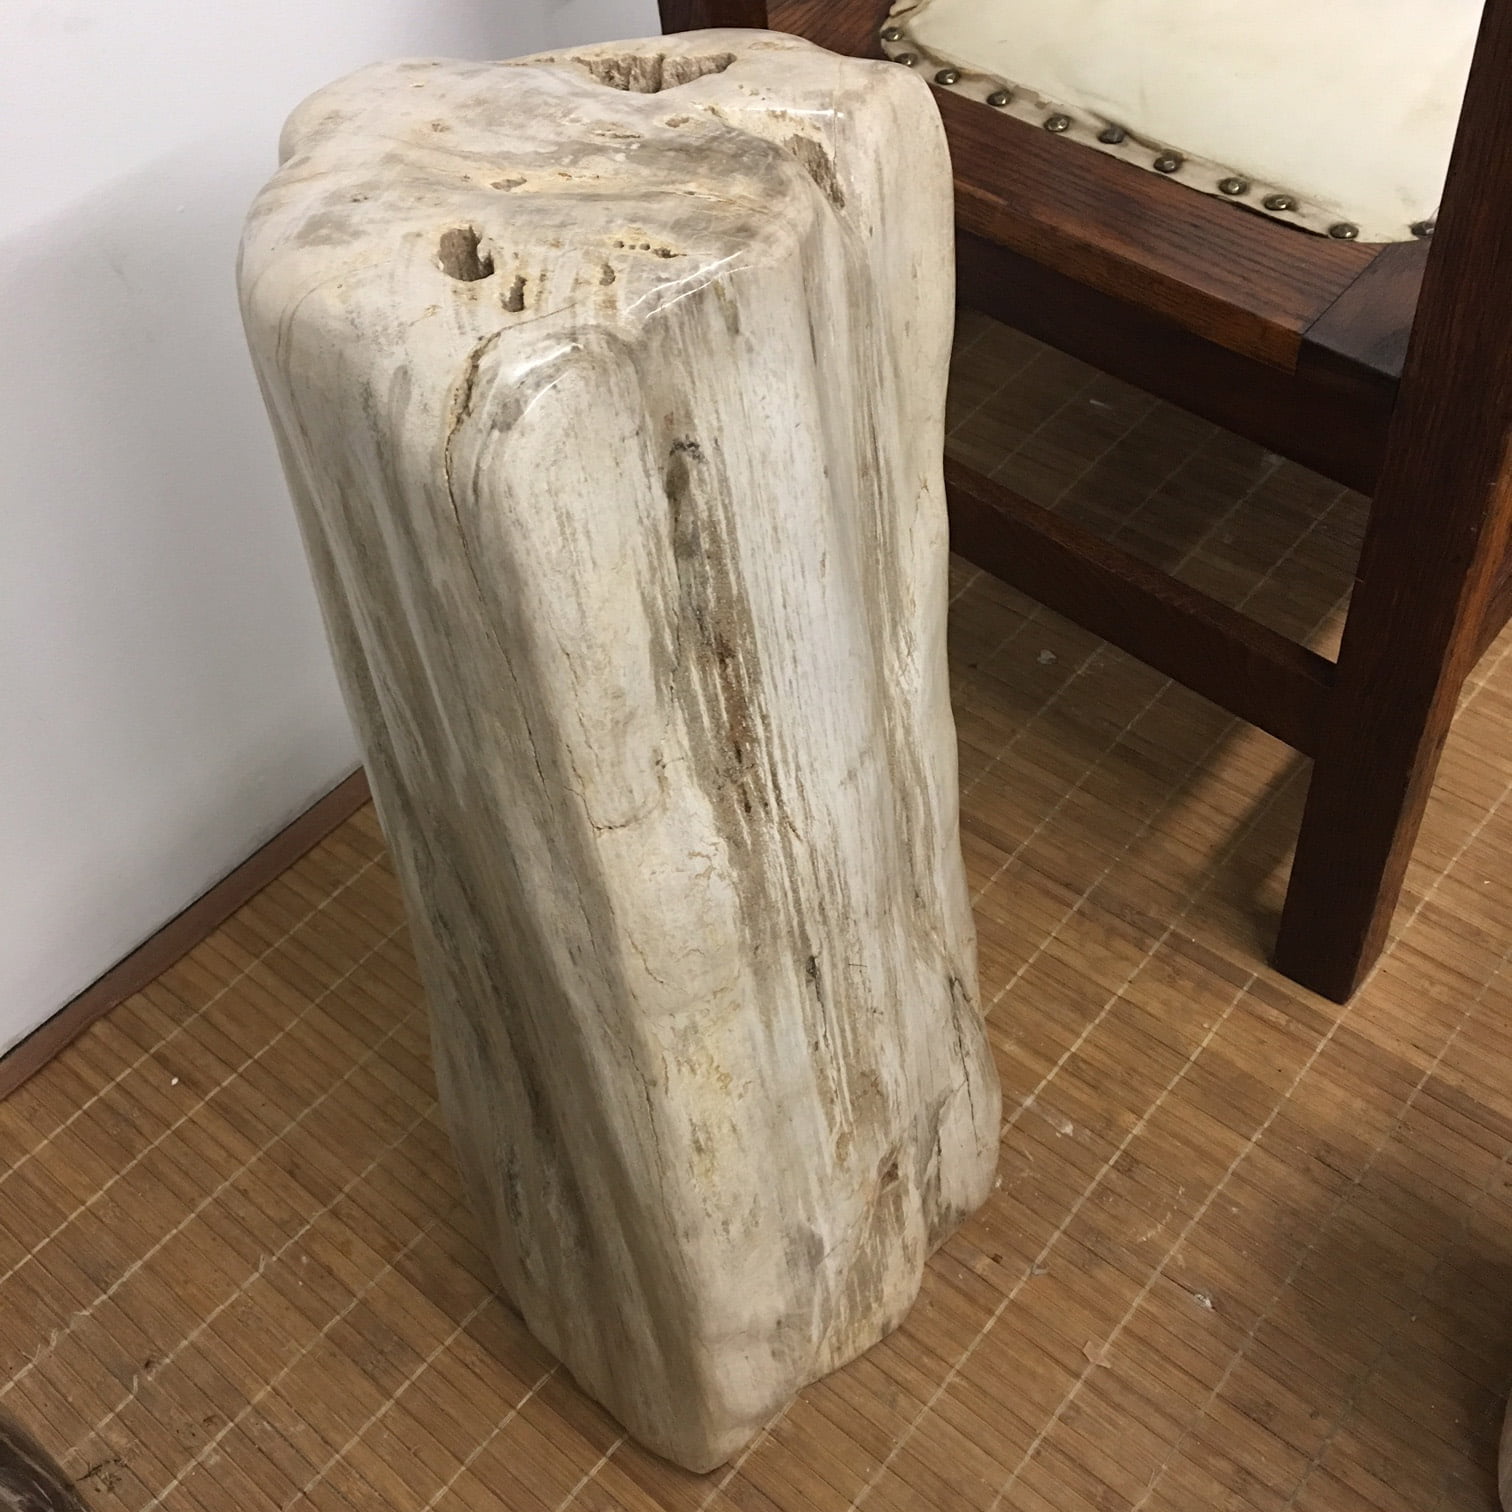 #IPW1 Petrified Wood Table Or Pedestal Or Stool 22.75"H x 9"L x 7"W 109 lbs